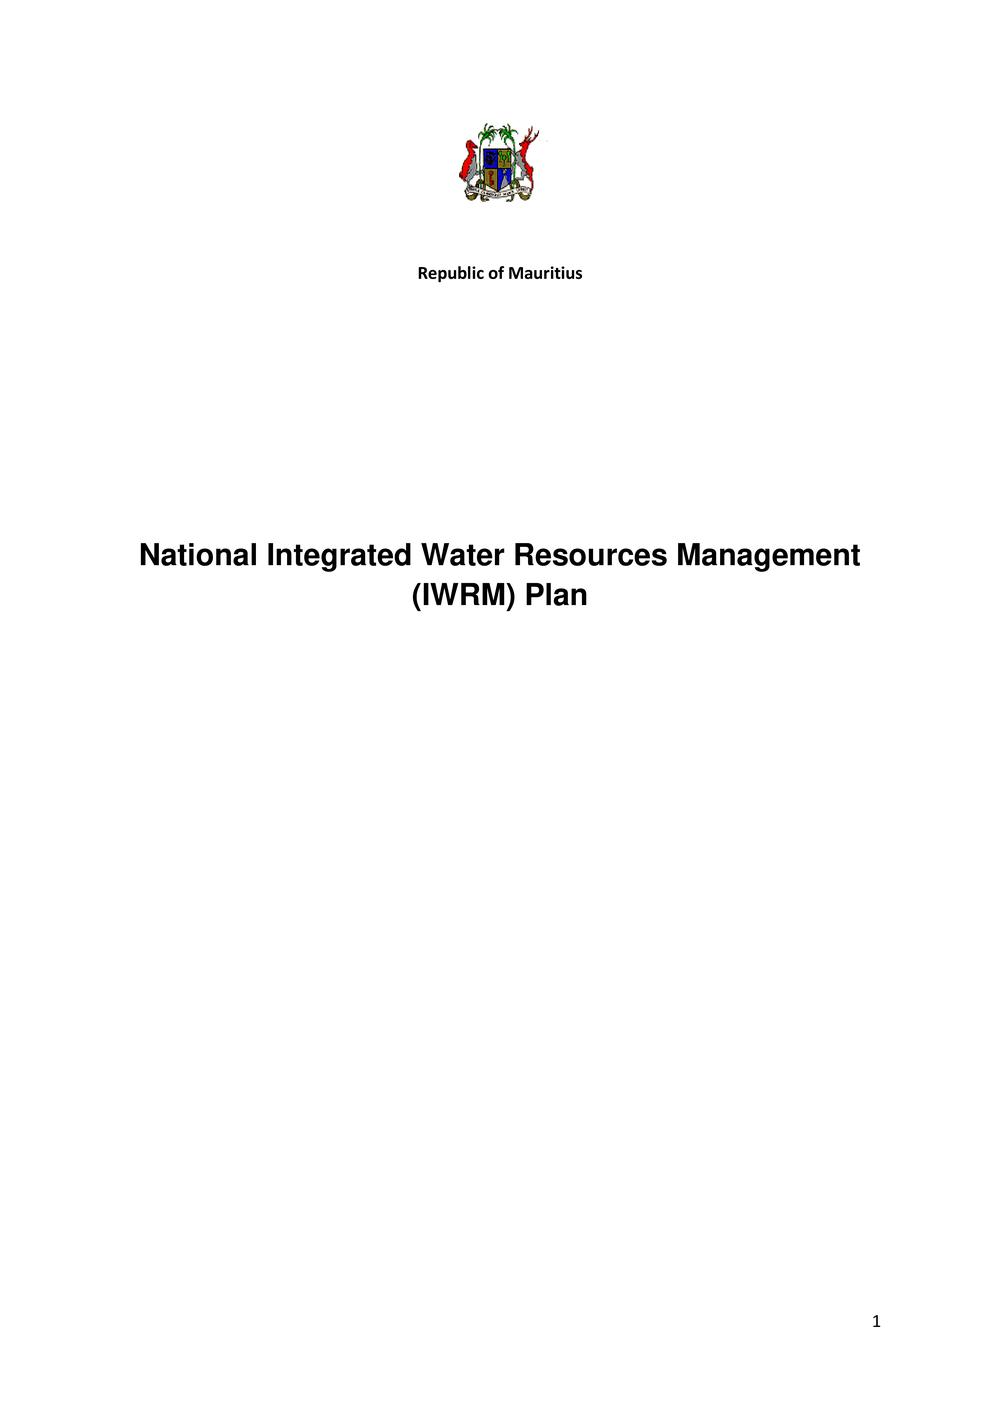 National Integrated Water Resources Management (IWRM) Plan.